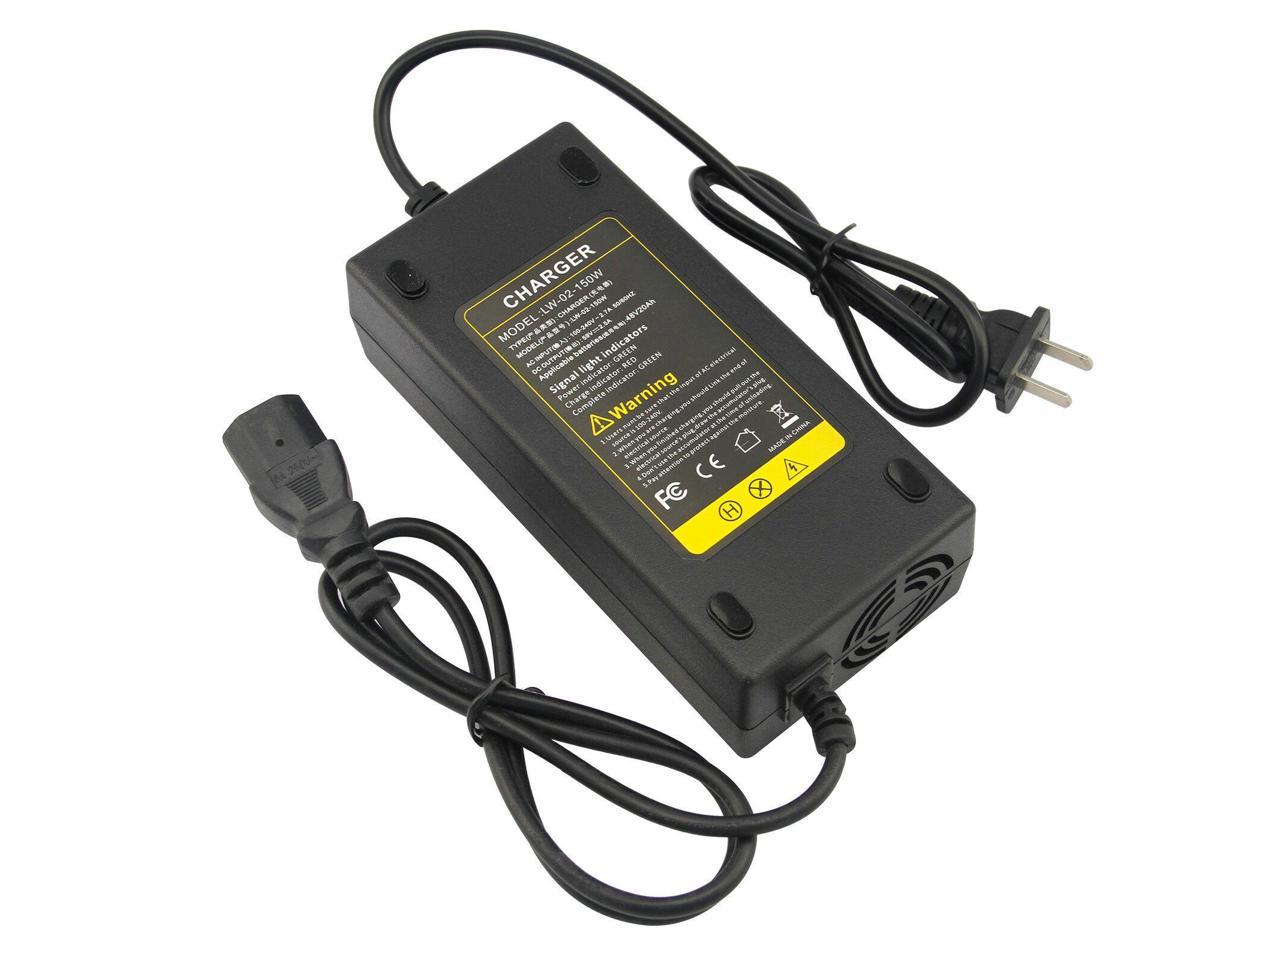 48V Volt 2.5A Battery Charger for Electric Car E-bike Scooter With Adaptor 